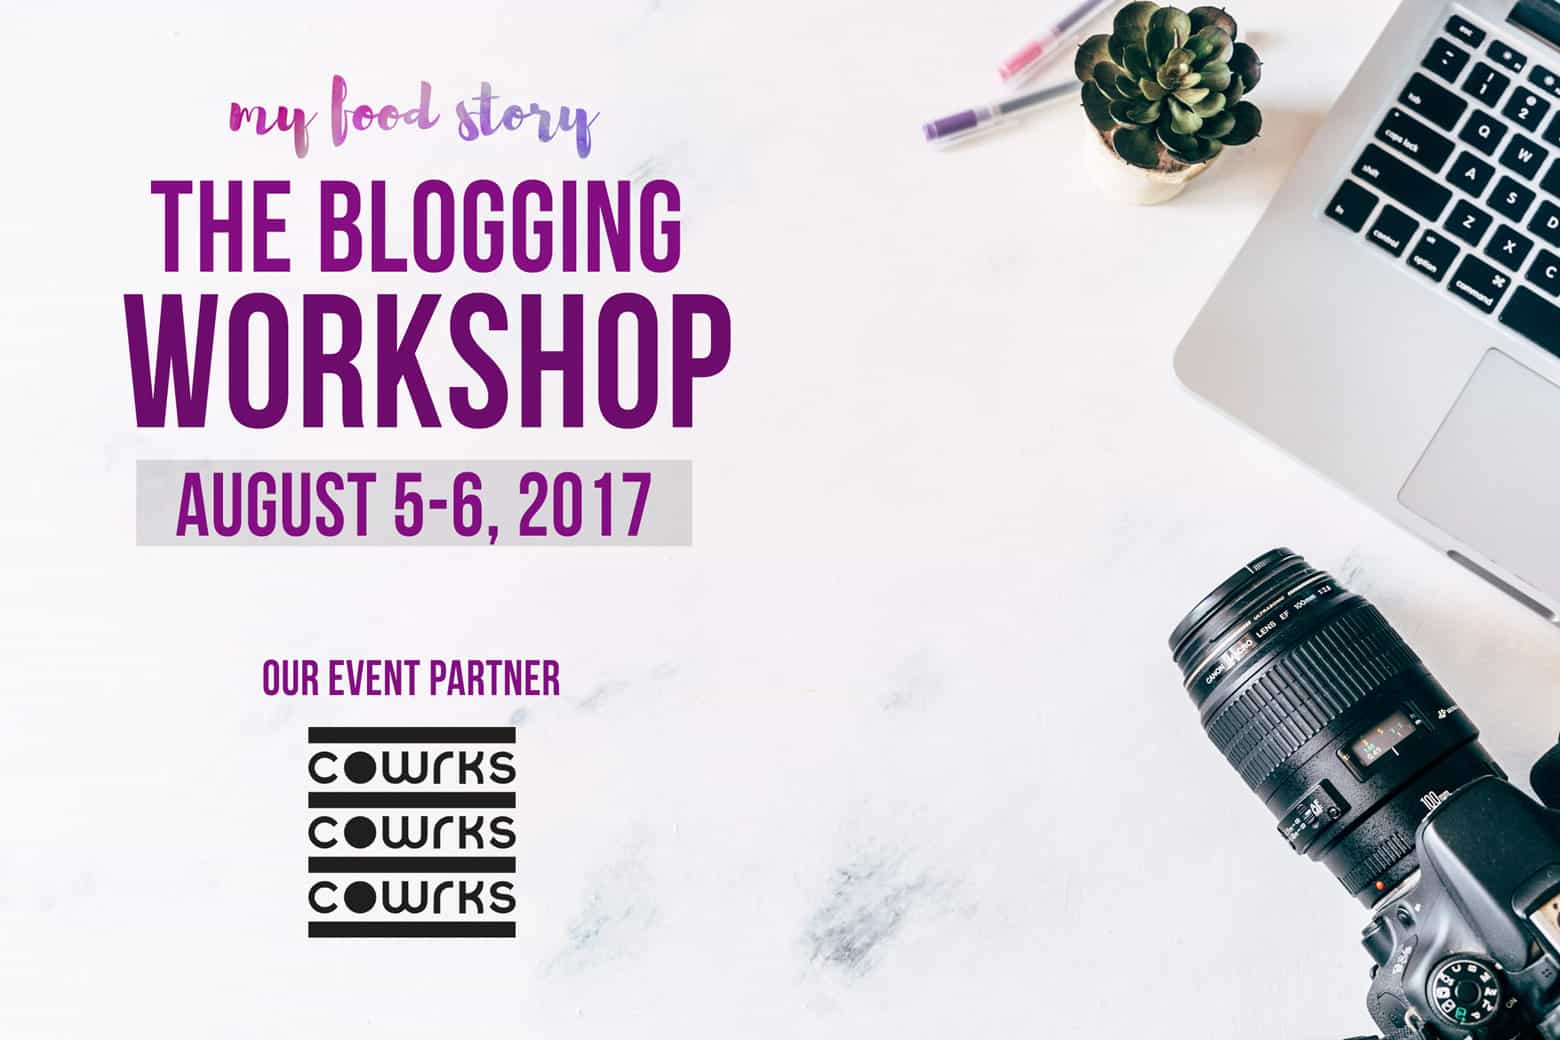 Discover how to grow your food blog into a business and earn an income from it with our comprehensive two day workshop